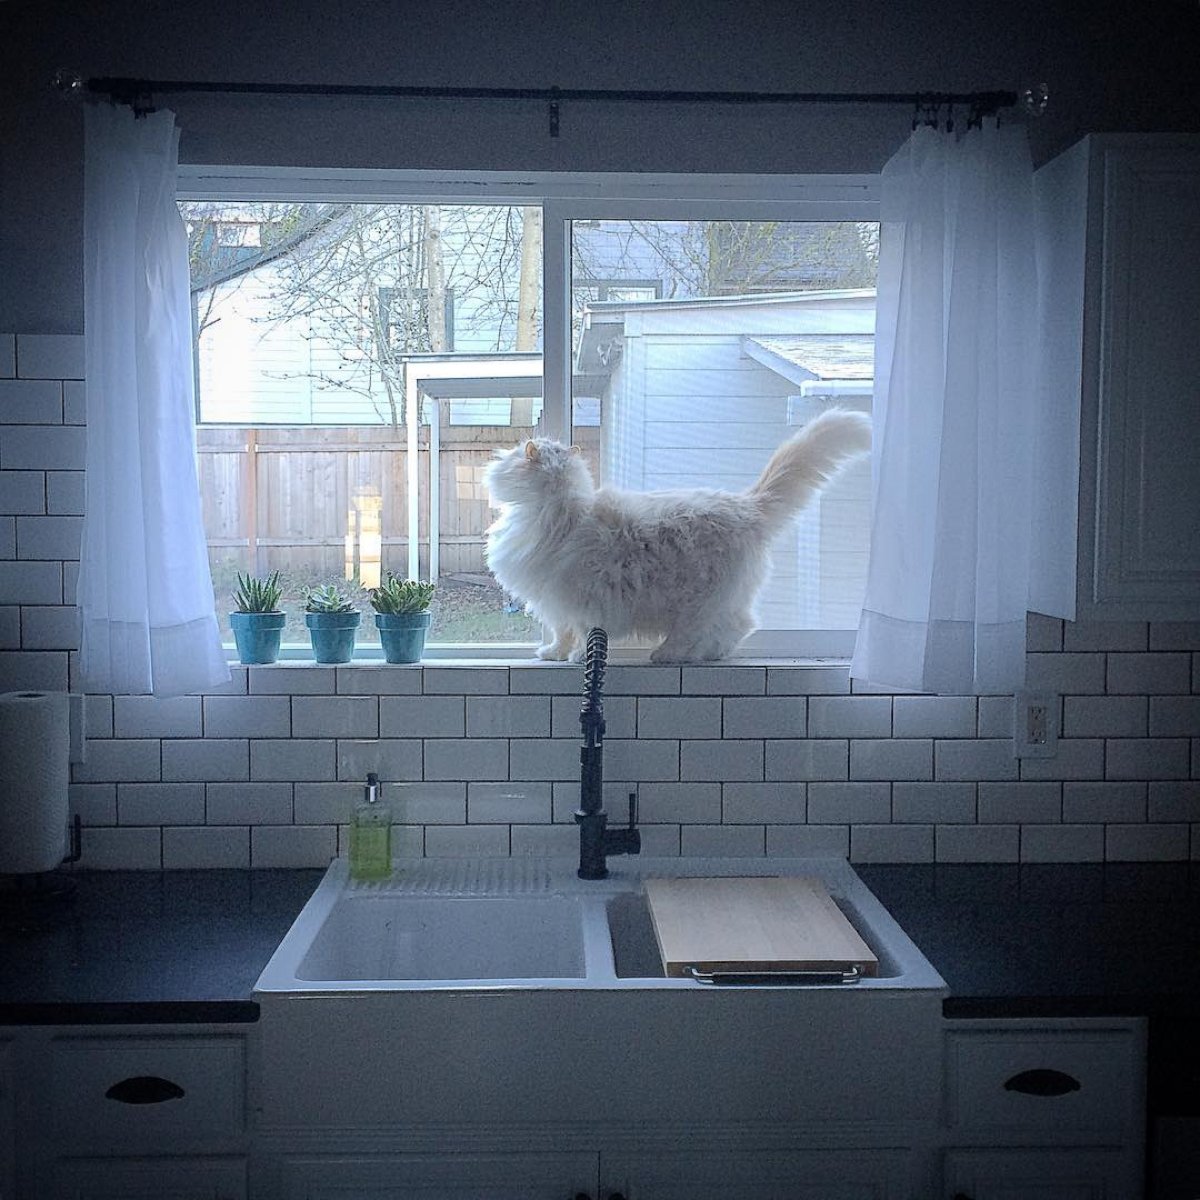 PHOTO:Sky the cat's Instagram account has more than 44,000 followers.